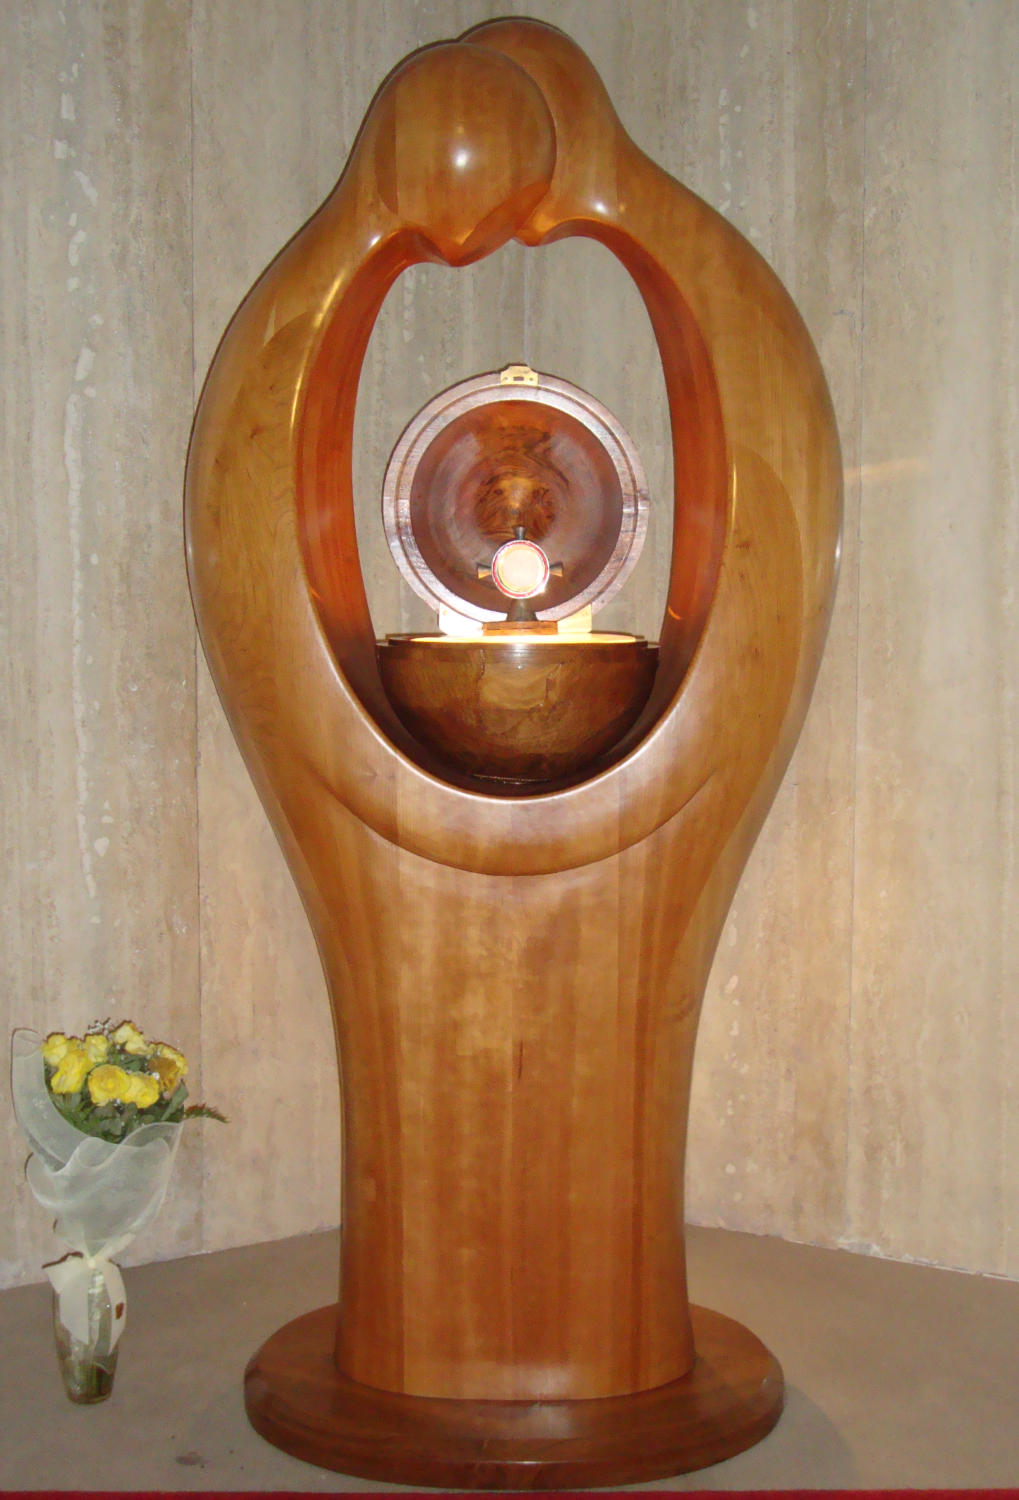 Tabernacle Carved in Wood, Silhouette of two people who meet, Monstrance with the Blessed Sacrament